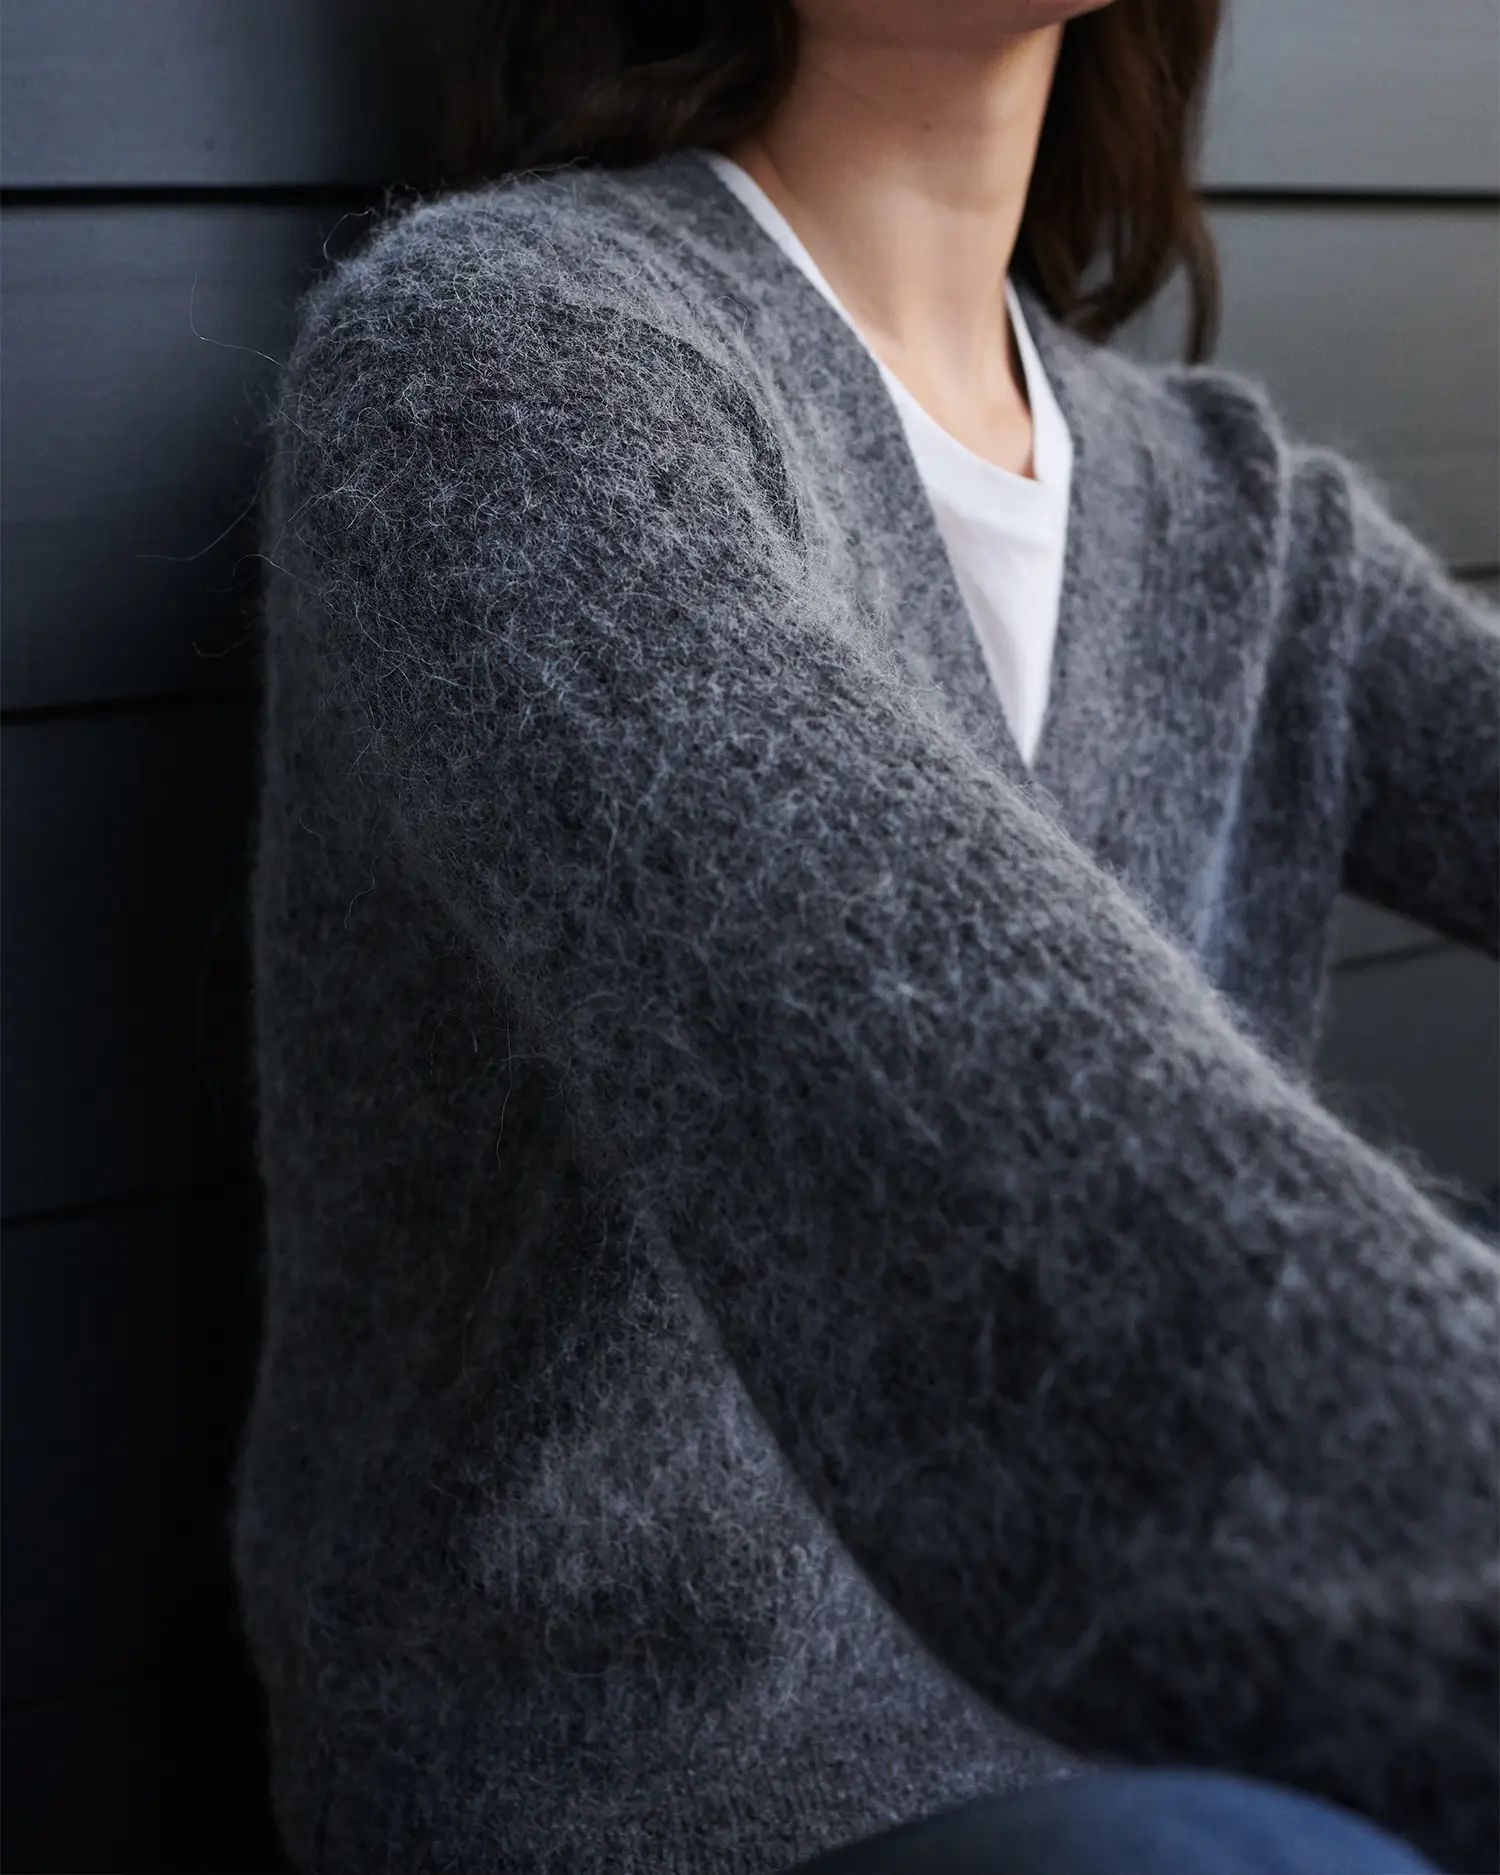 Baby Alpaca-Wool Cropped Cardigan | Quince